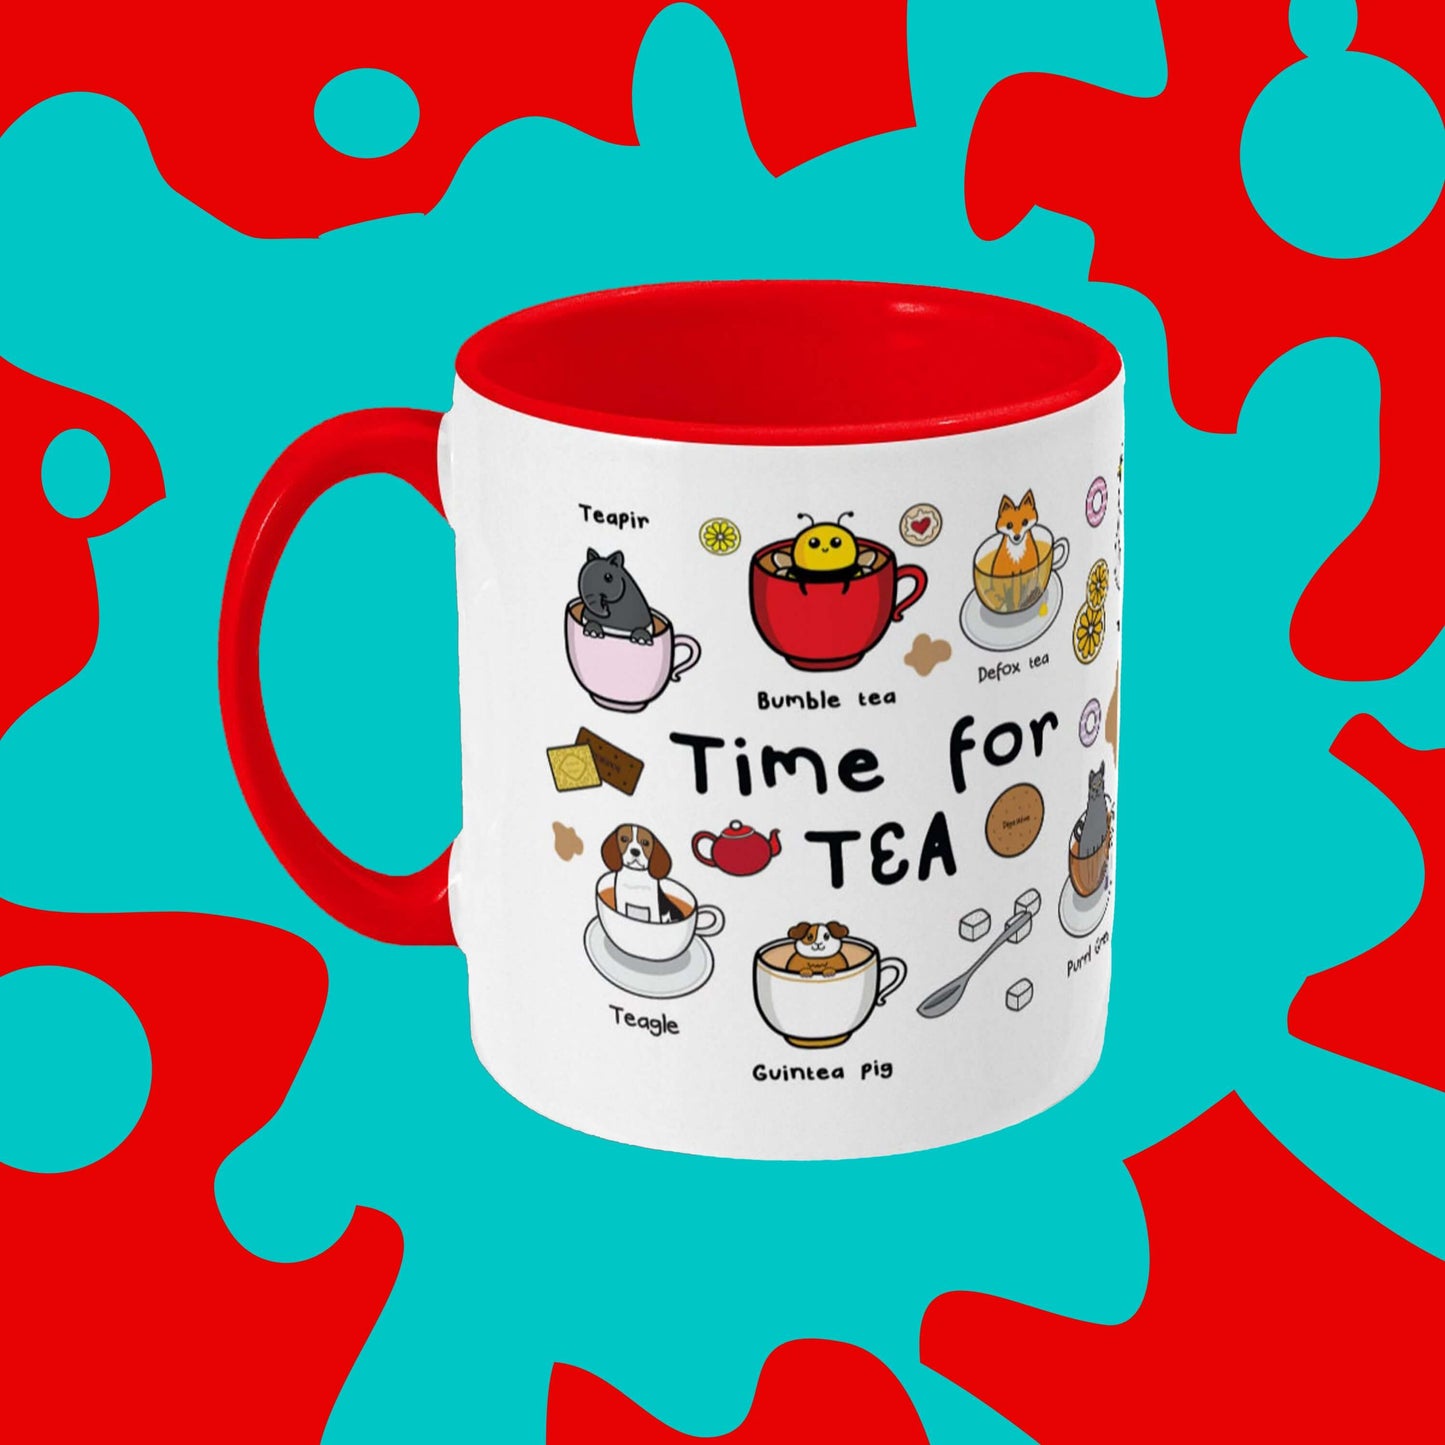 Time For Tea Mug on a red and blue background. The white mug has a red handle and inside with various Innabox animal illustrations in tea and coffee cups with biscuits, spoons and sugar cubes. There are also various tea puns on the mug in black text.